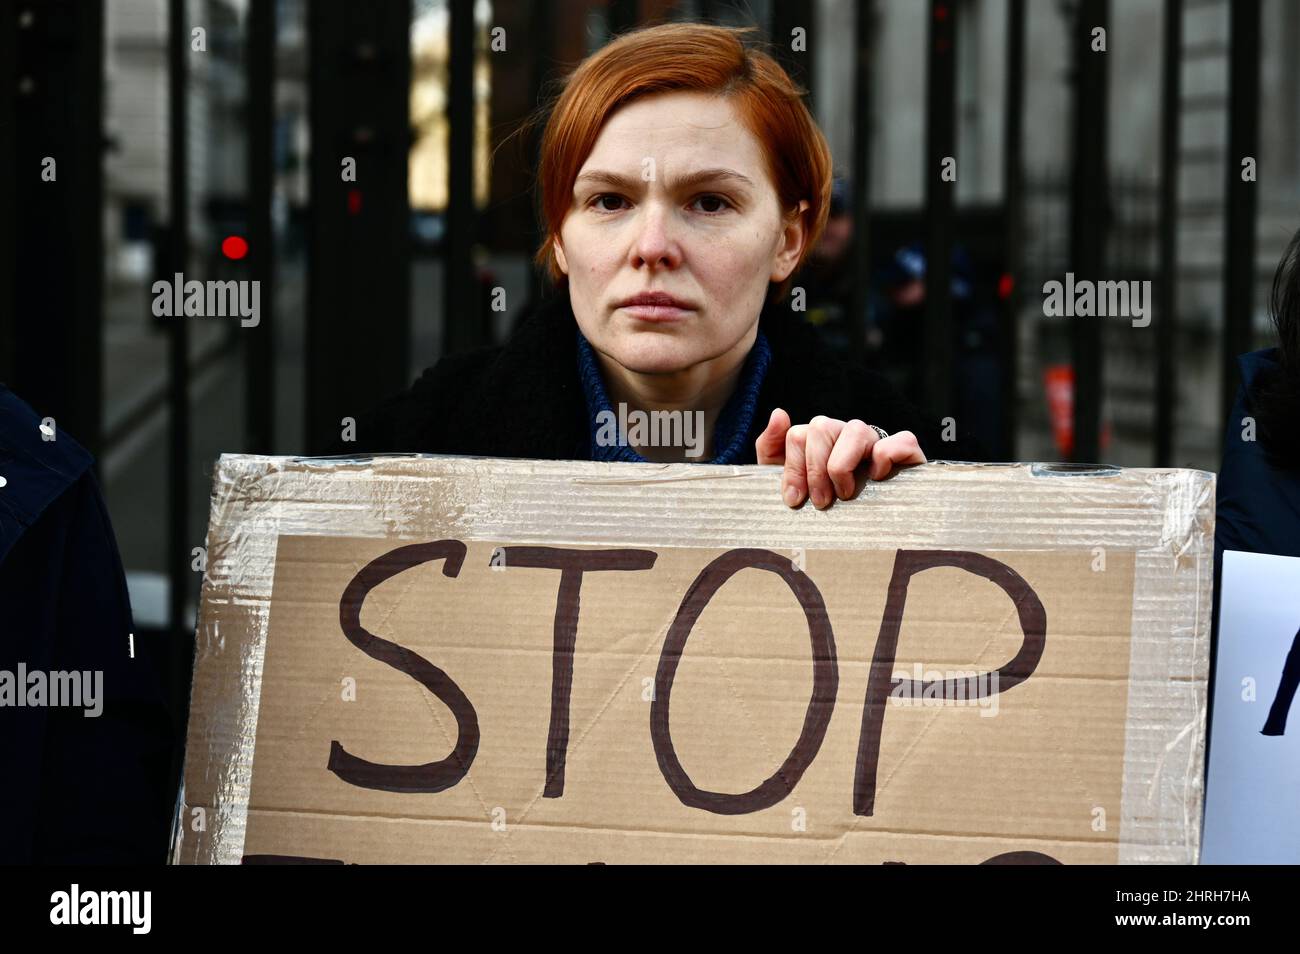 London, UK. 25th Feb, 2022. London, UK. Ukrainian citizens living in the UK gathered outside of Downing Street to demonstrate against the Russian invasion of Ukraine. Credit: michael melia/Alamy Live News Stock Photo